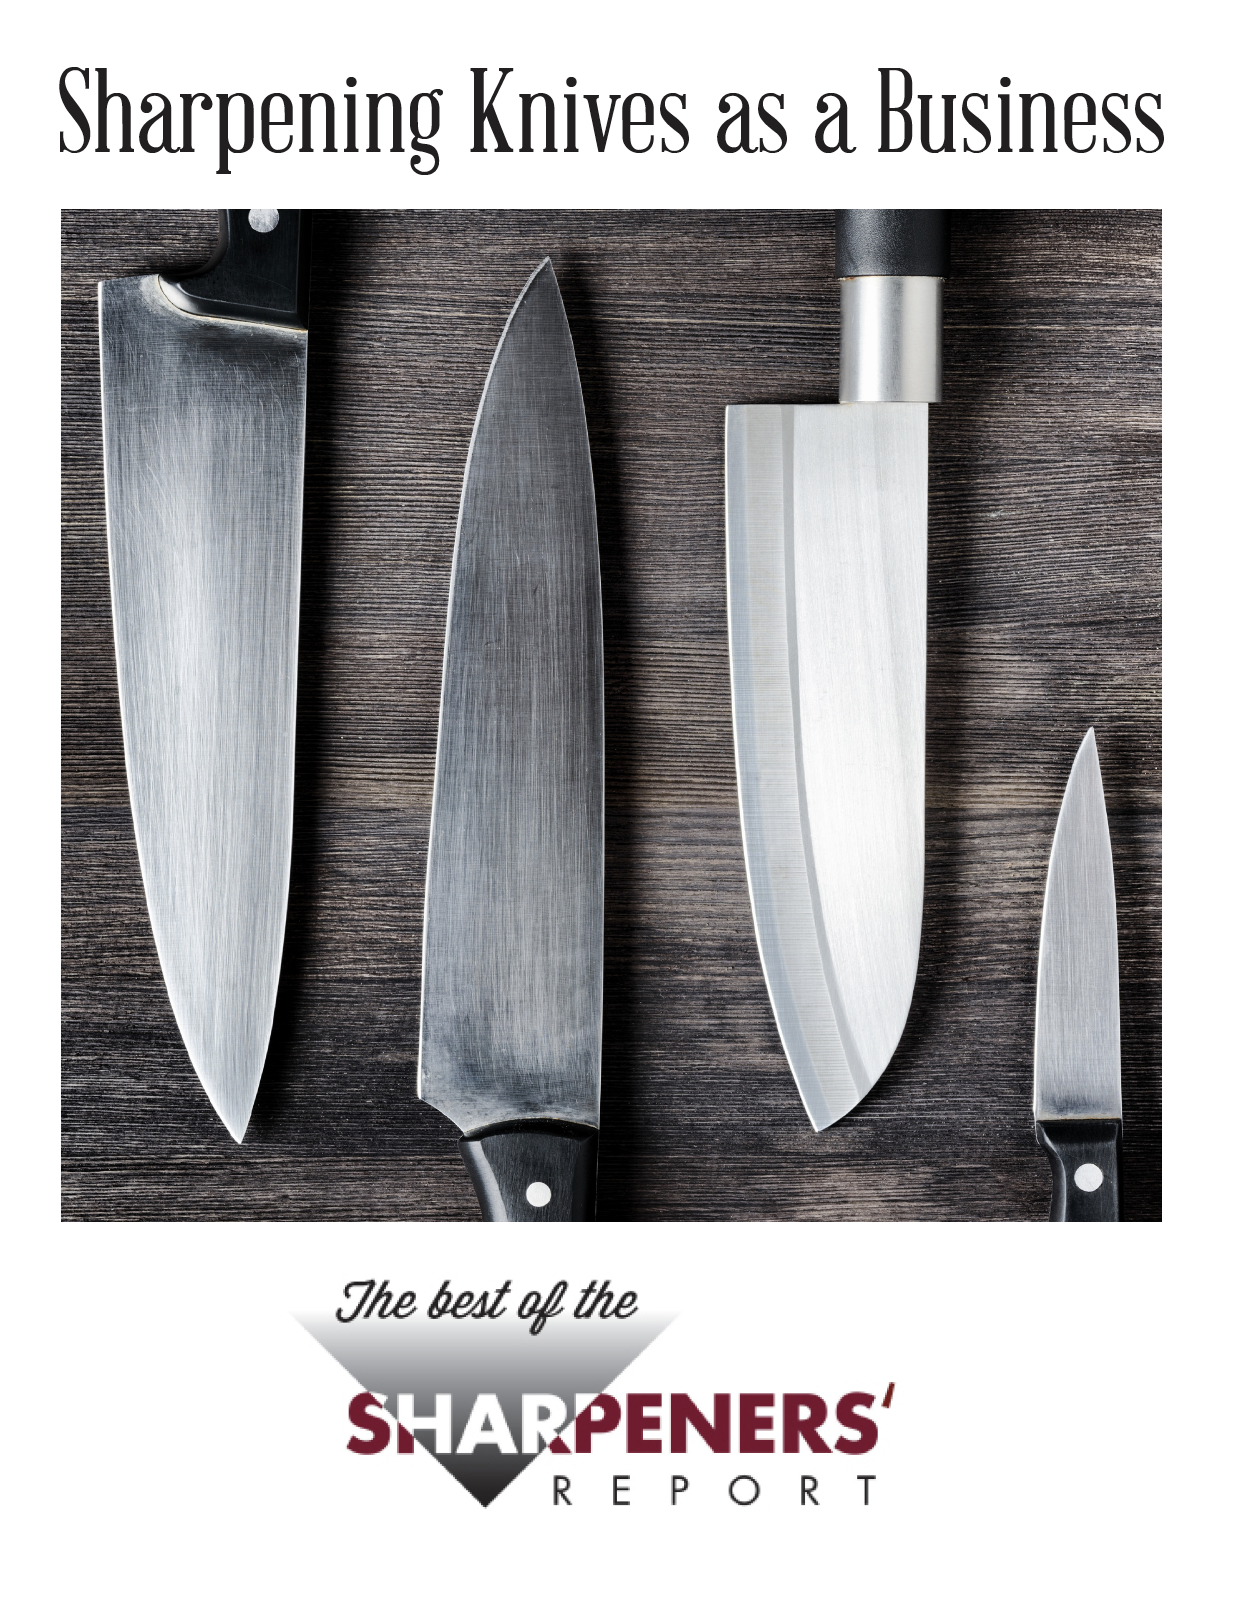 https://sharpeners-report.com/wp-content/uploads/2021/06/COVER-Sharpen-Knives-as-Business-Ebook.png